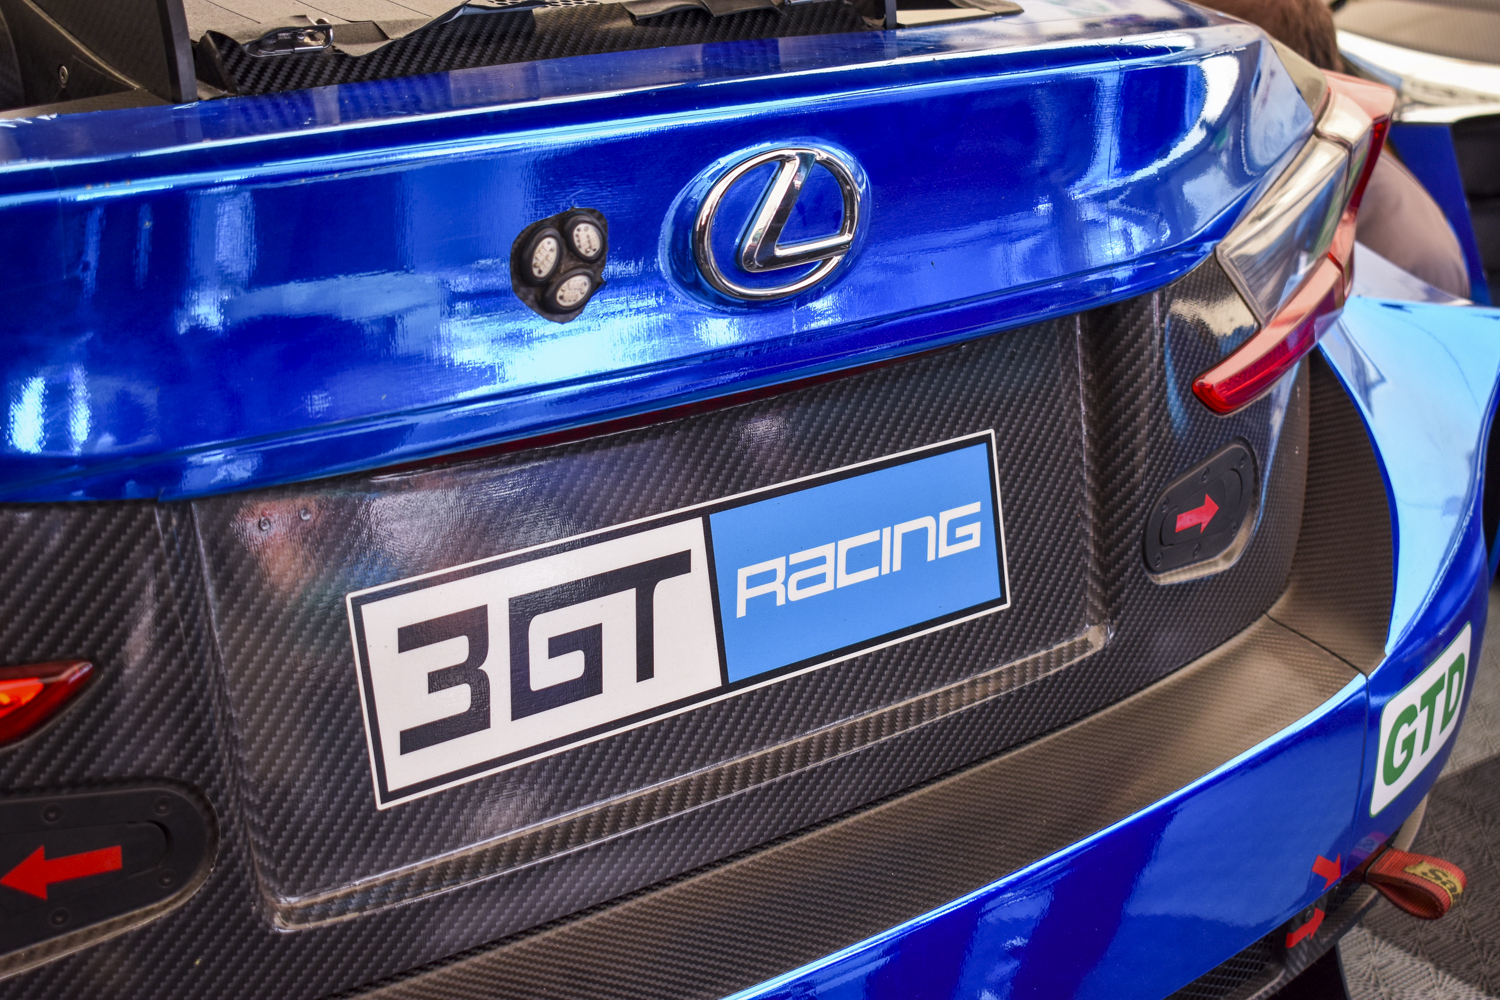 Close-up detail shot of the Lexus RC F GT3 license plate area